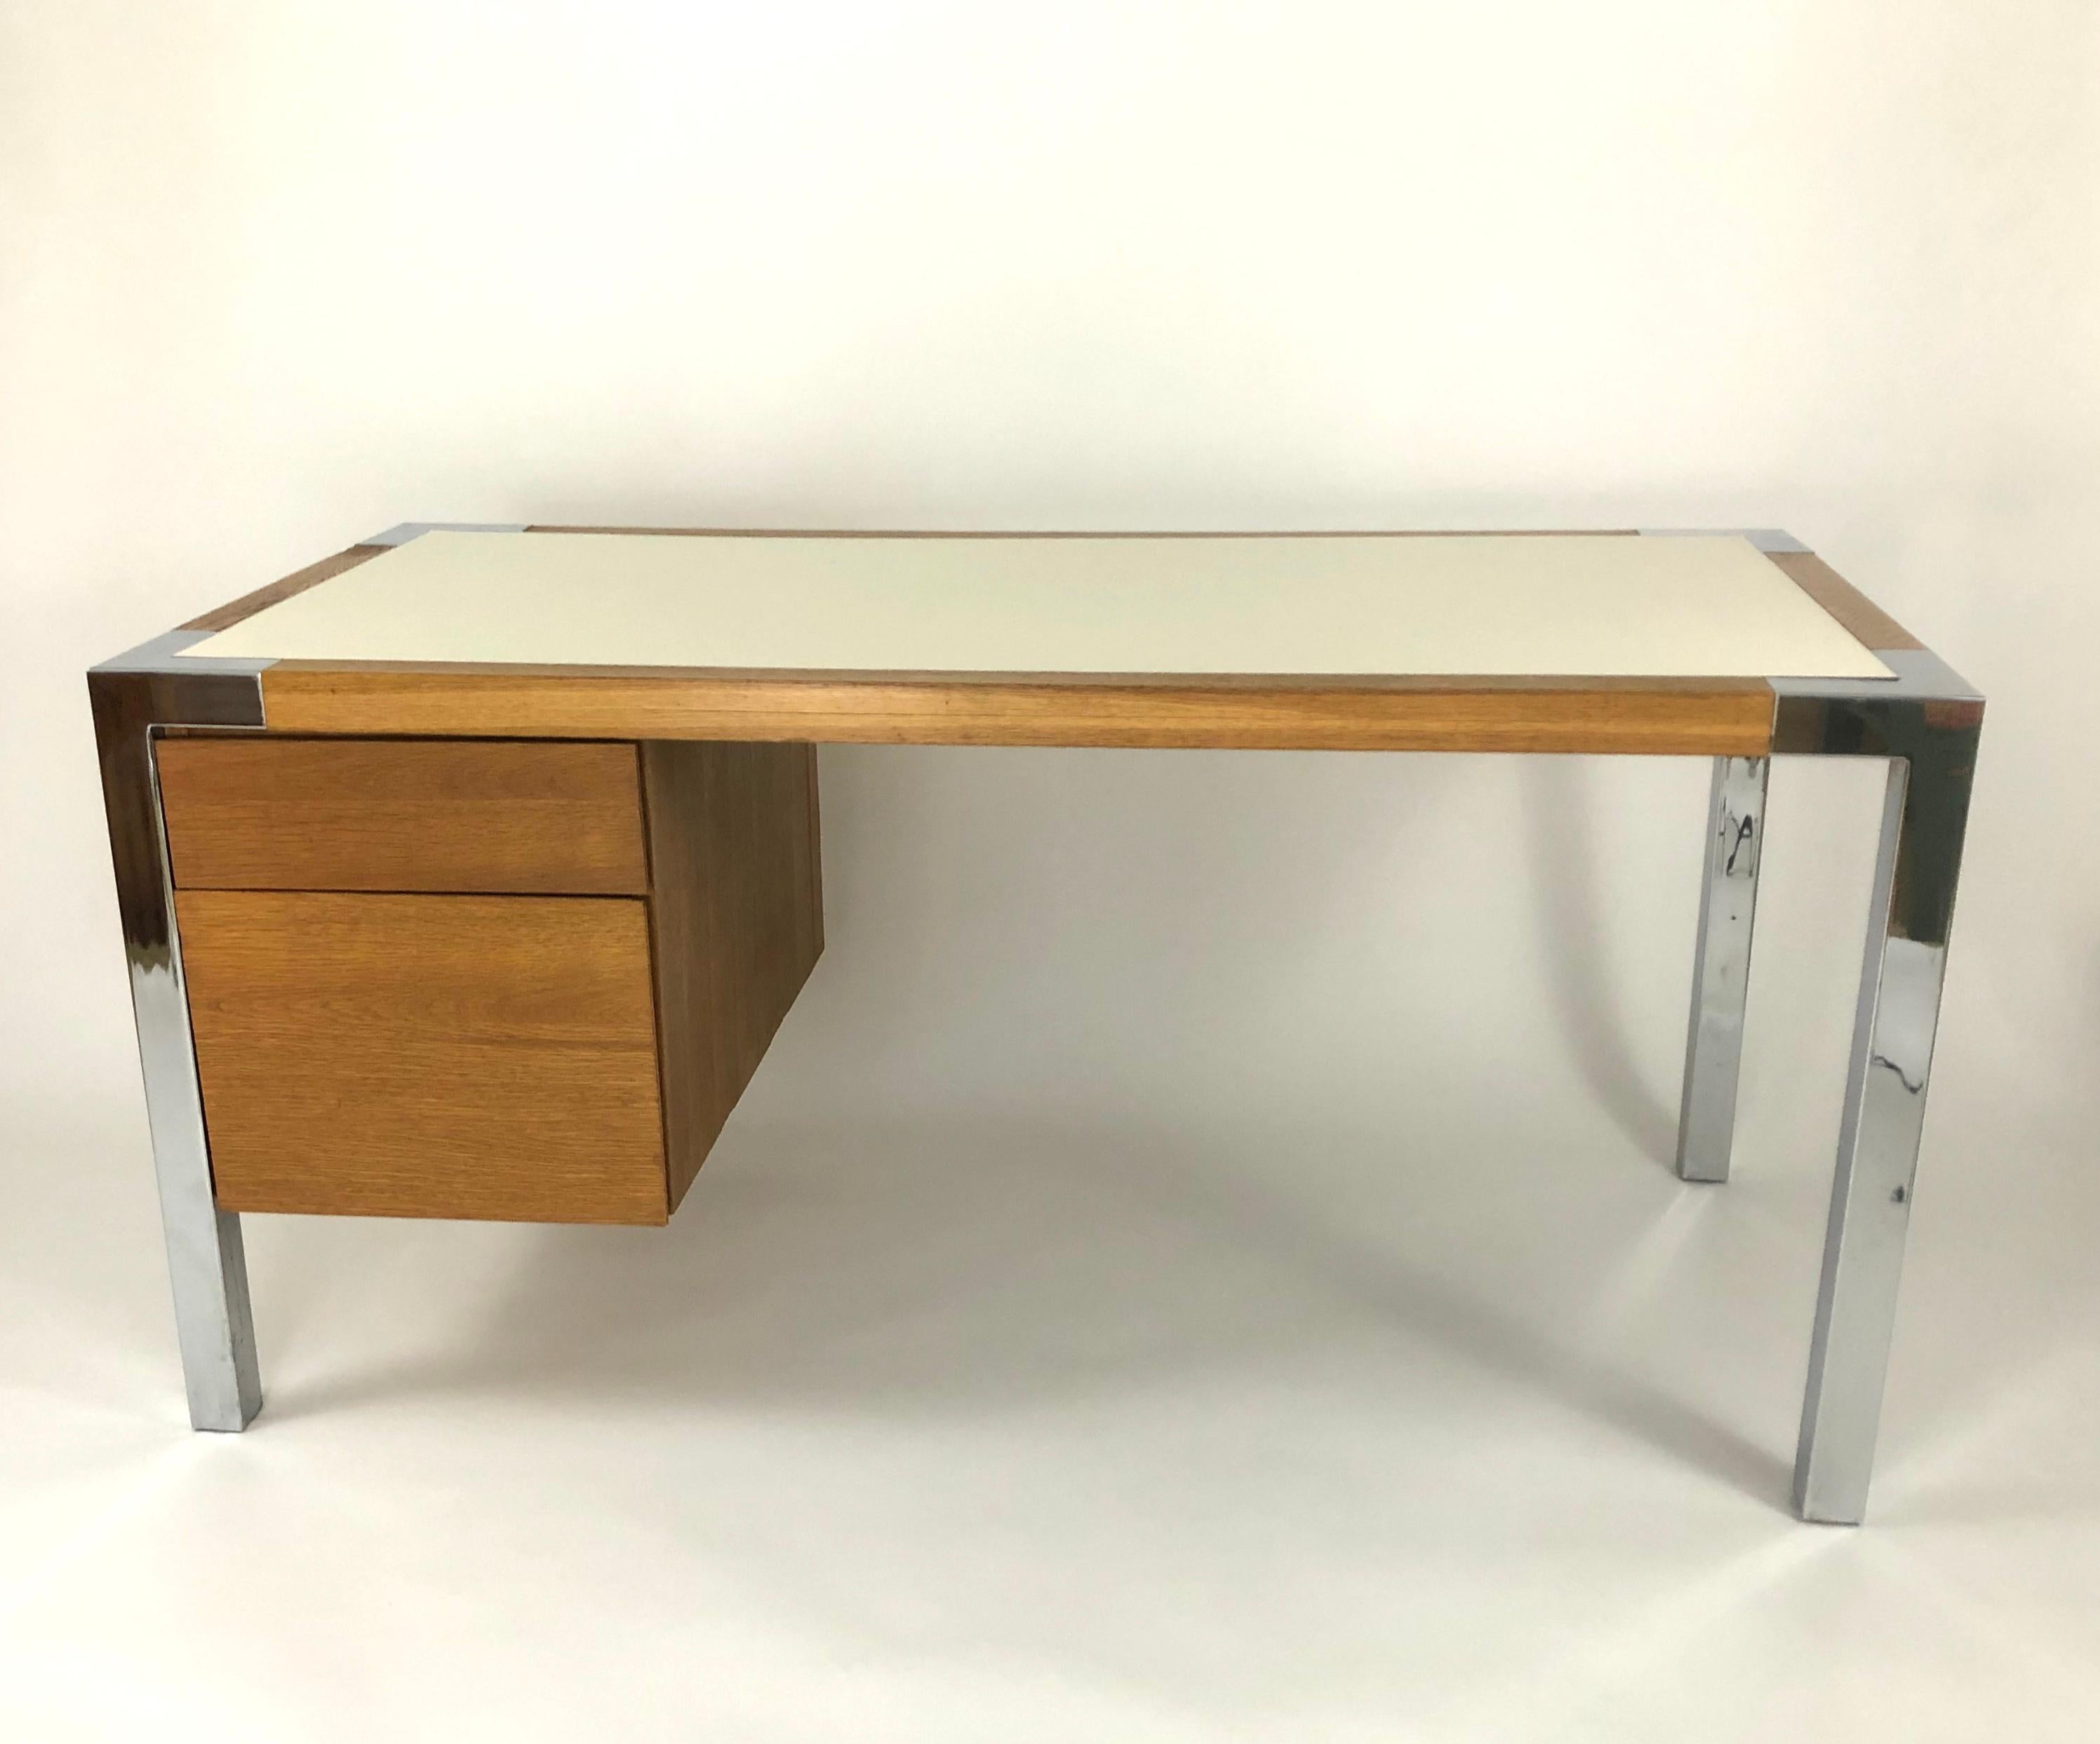 A beautifully made and stylish 1970s desk in oak with chrome trimmed corners and chrome square section legs, of rectangular form with two graduated drawers on the left hand side and a cream colored formica top. Well proportioned, very sturdy, with